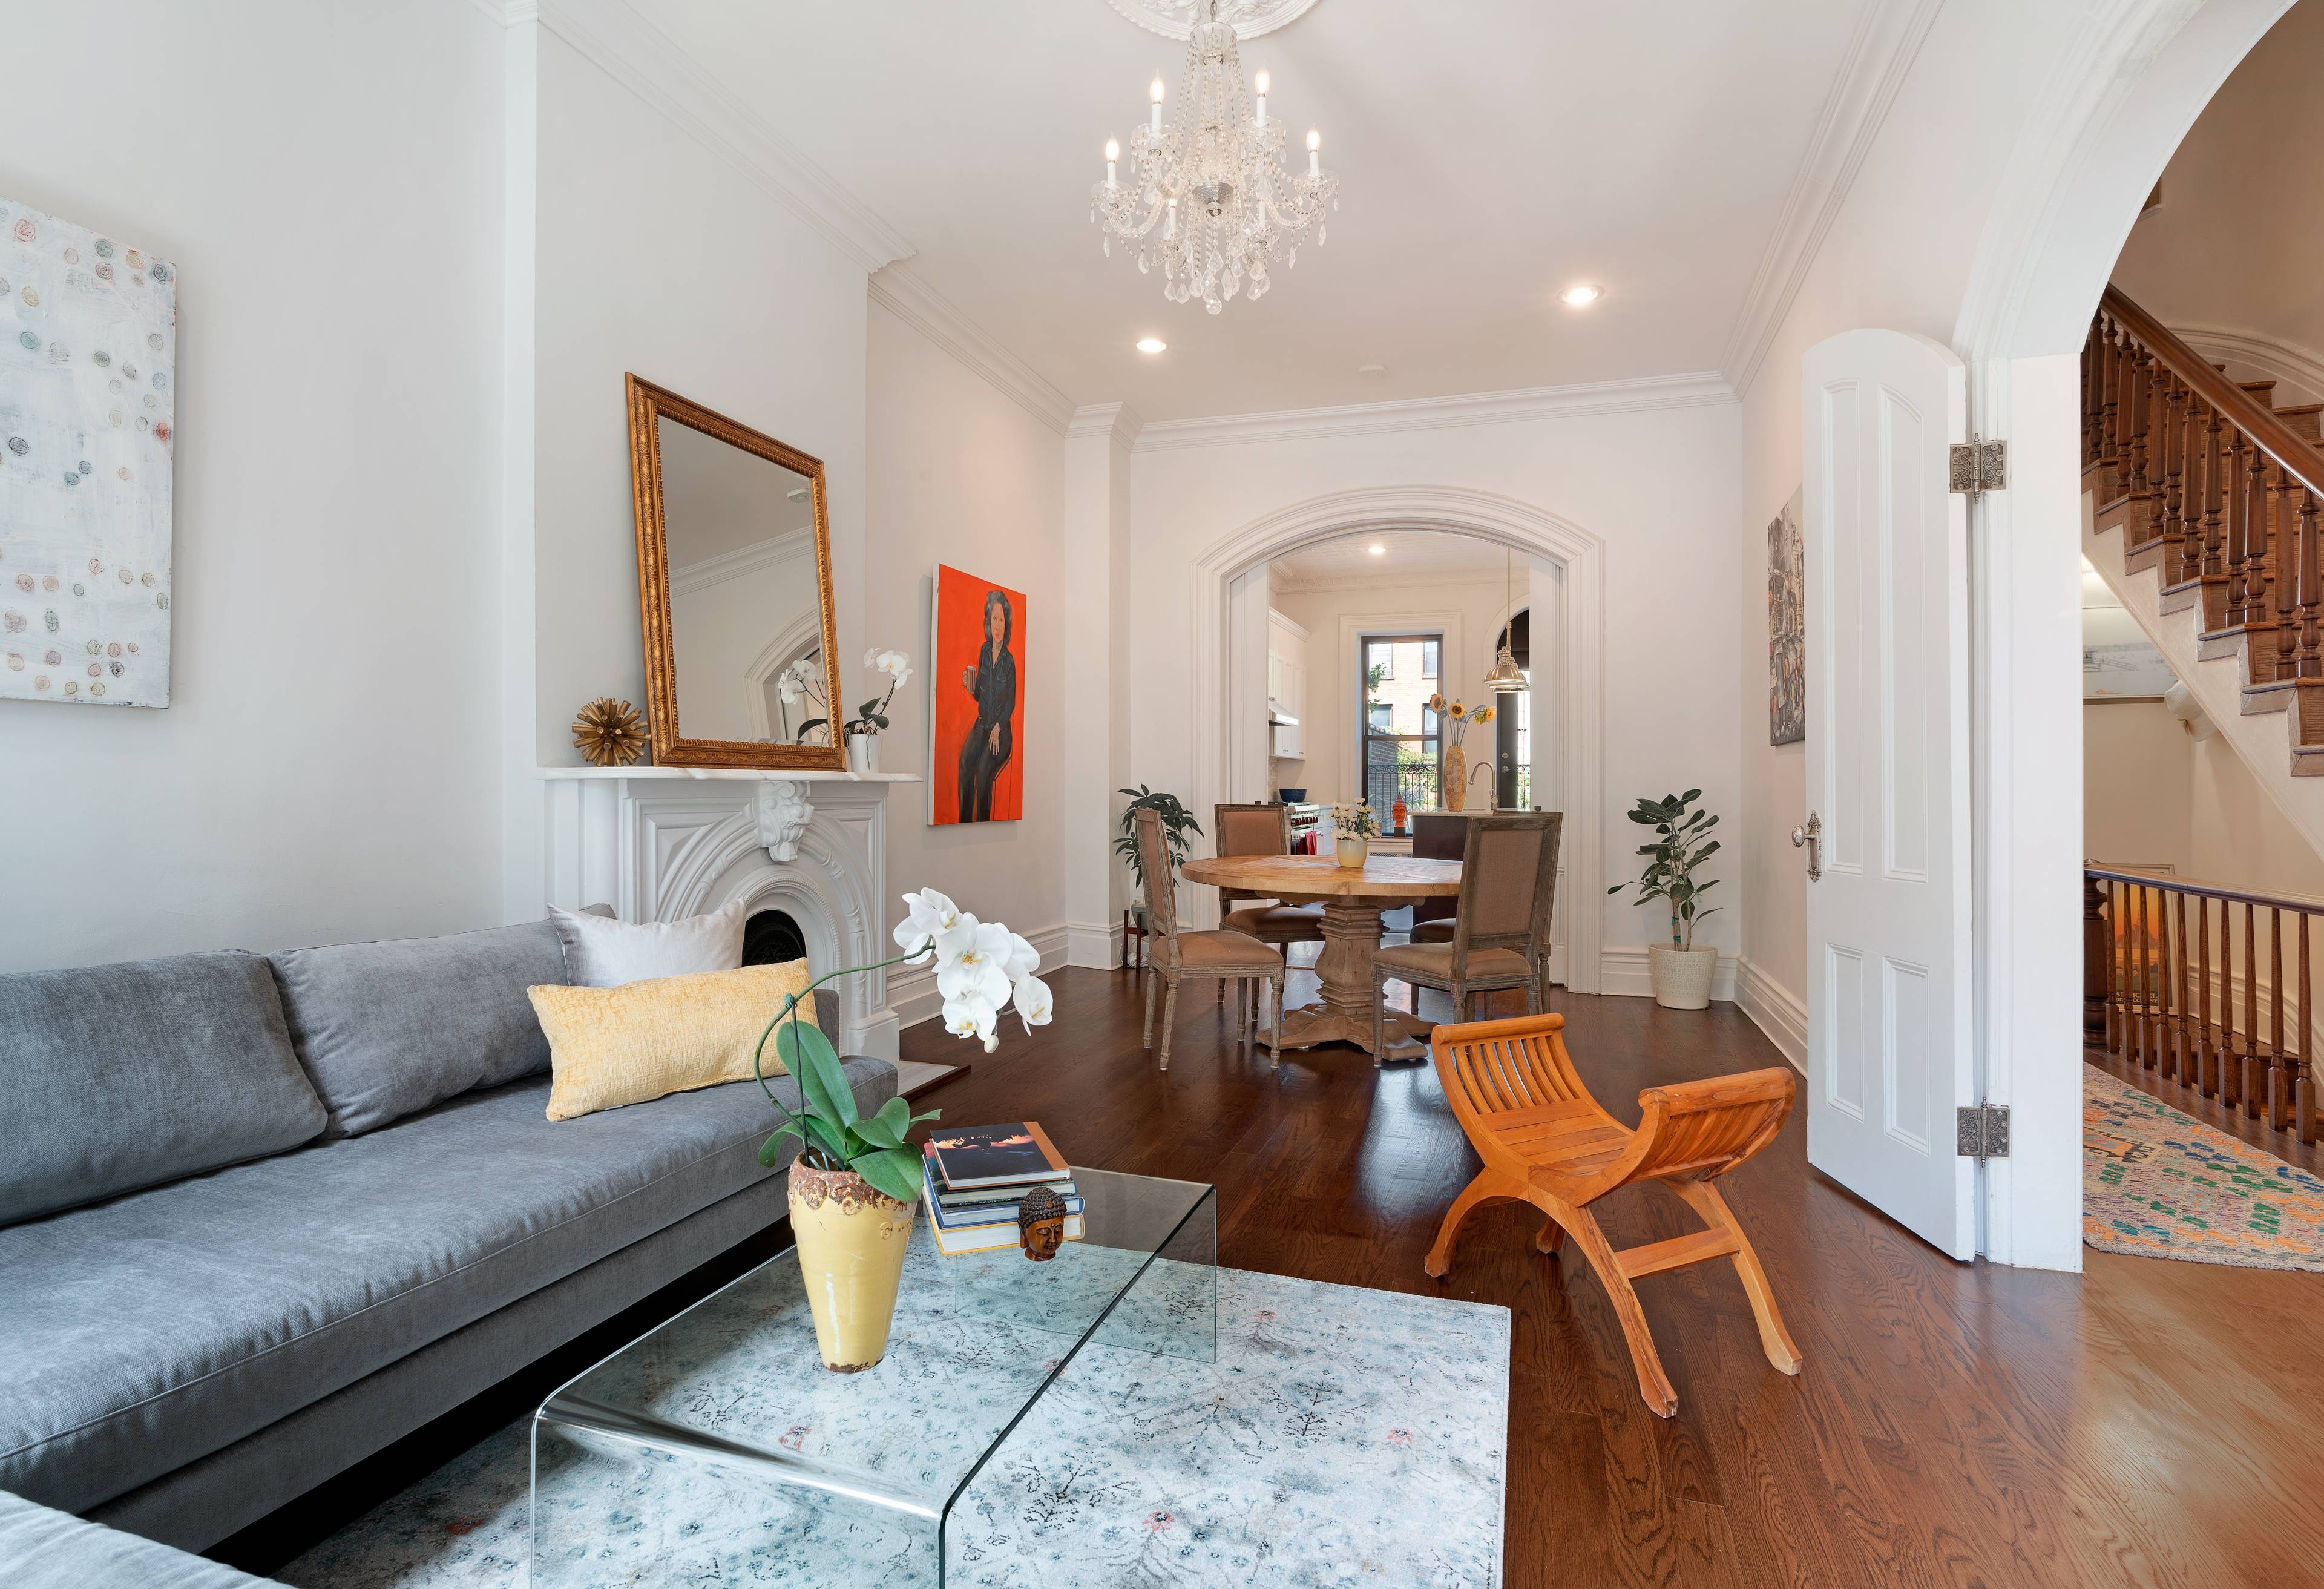 Designed to accommodate a multi generational family, this four story brownstone was fully renovated over the last five years.